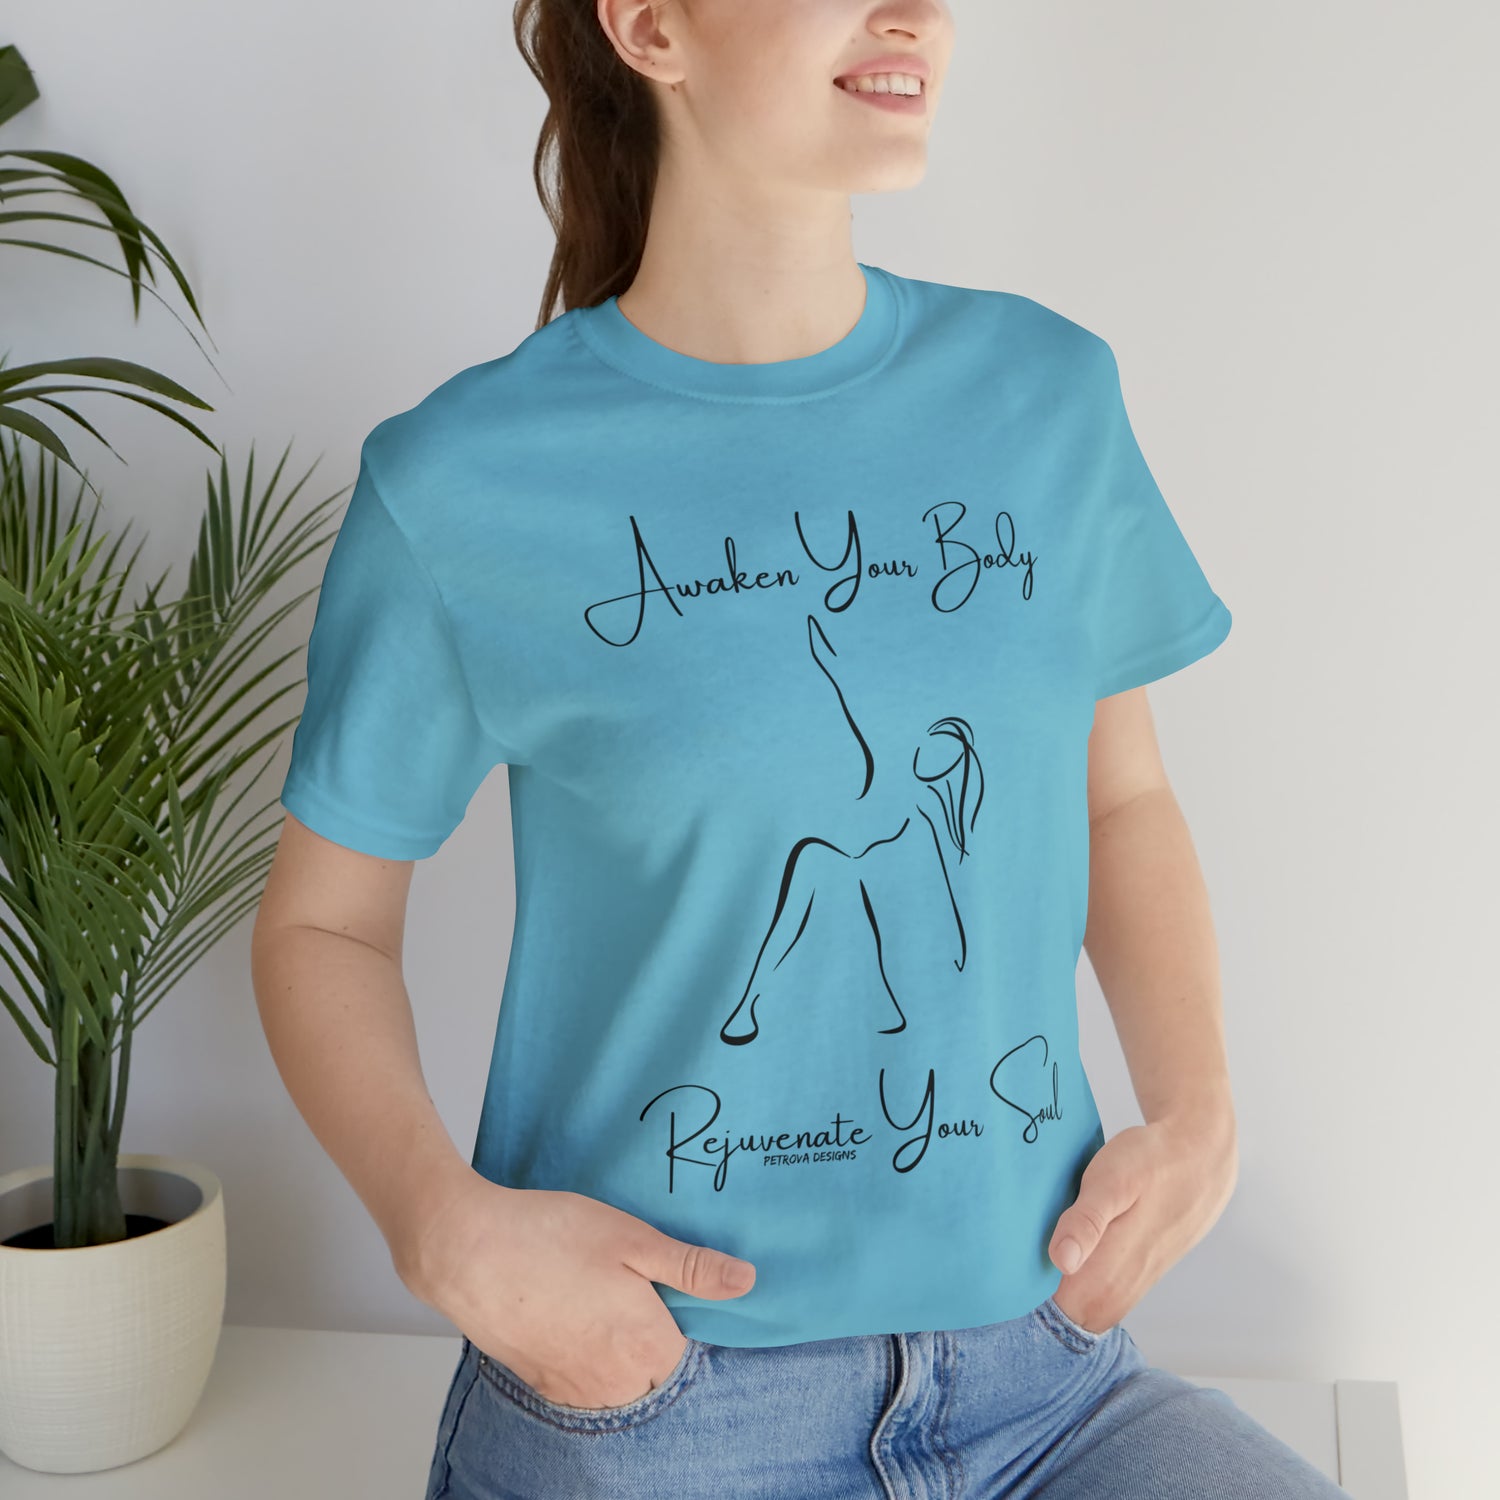 Turquoise S T-Shirt Tshirt Design Gift for Friend and Family Short Sleeved Shirt Yoga Petrova Designs